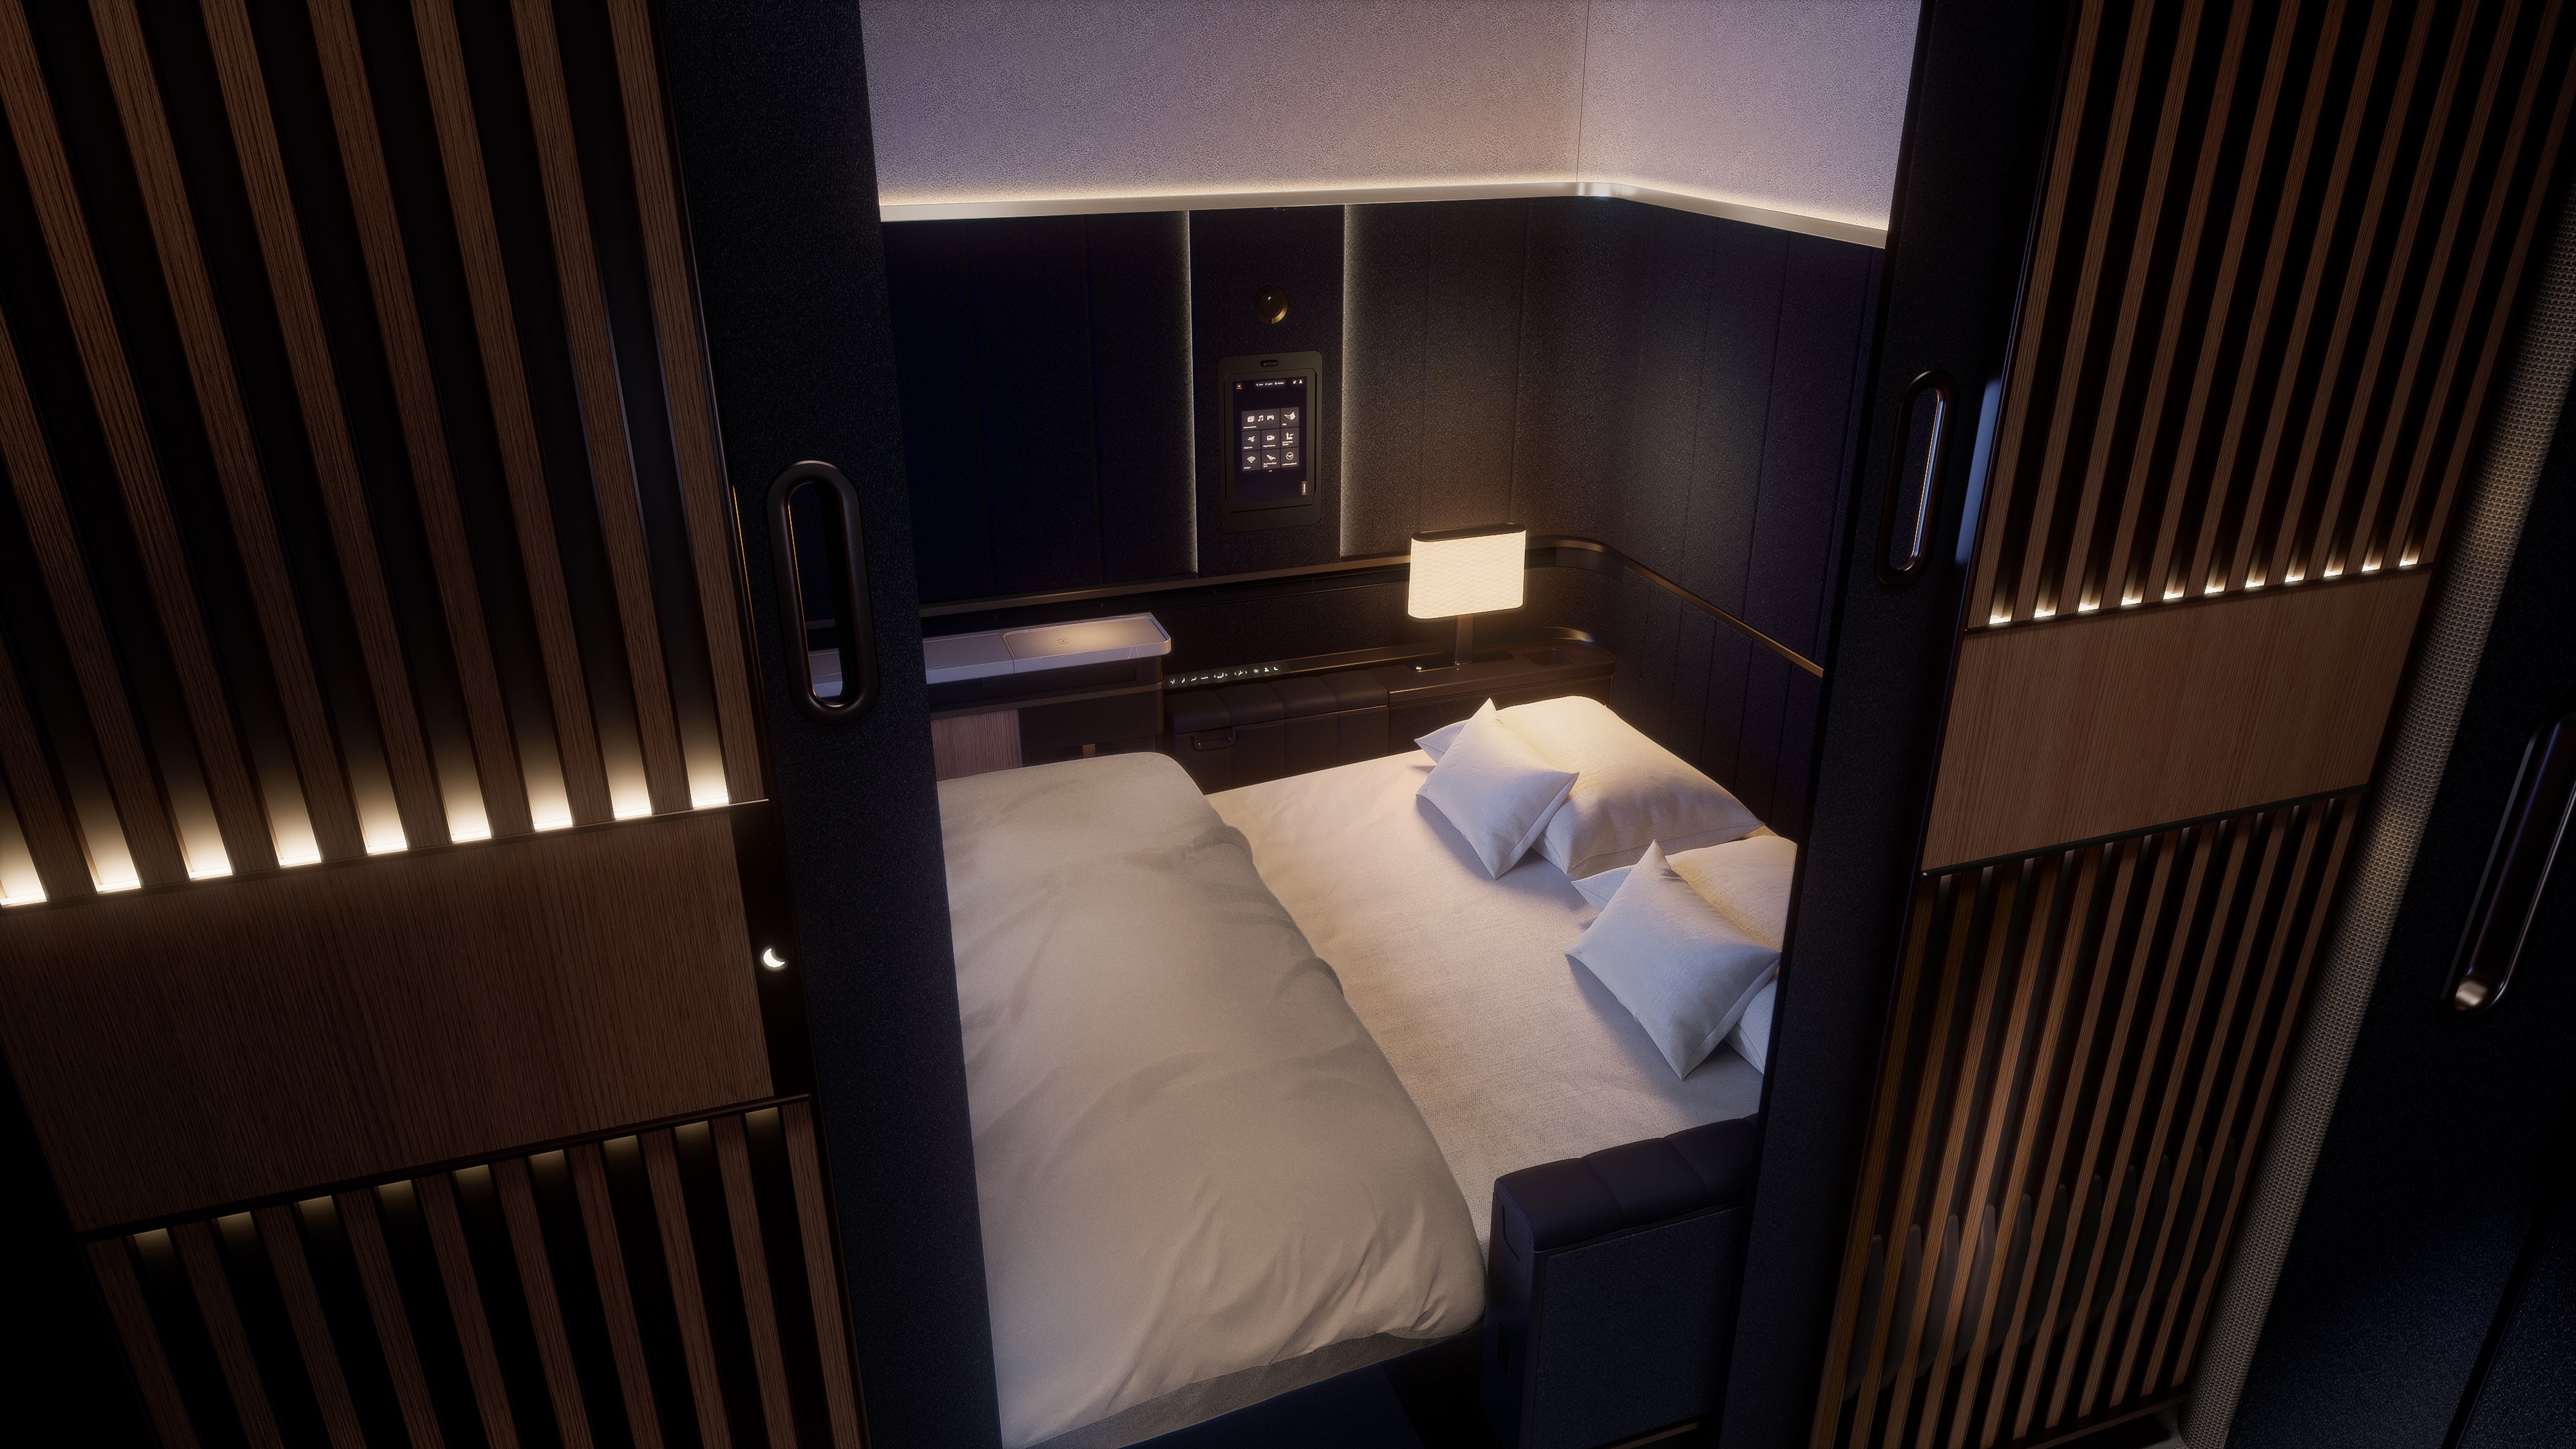 The new Lufthansa First Class Suite Plus